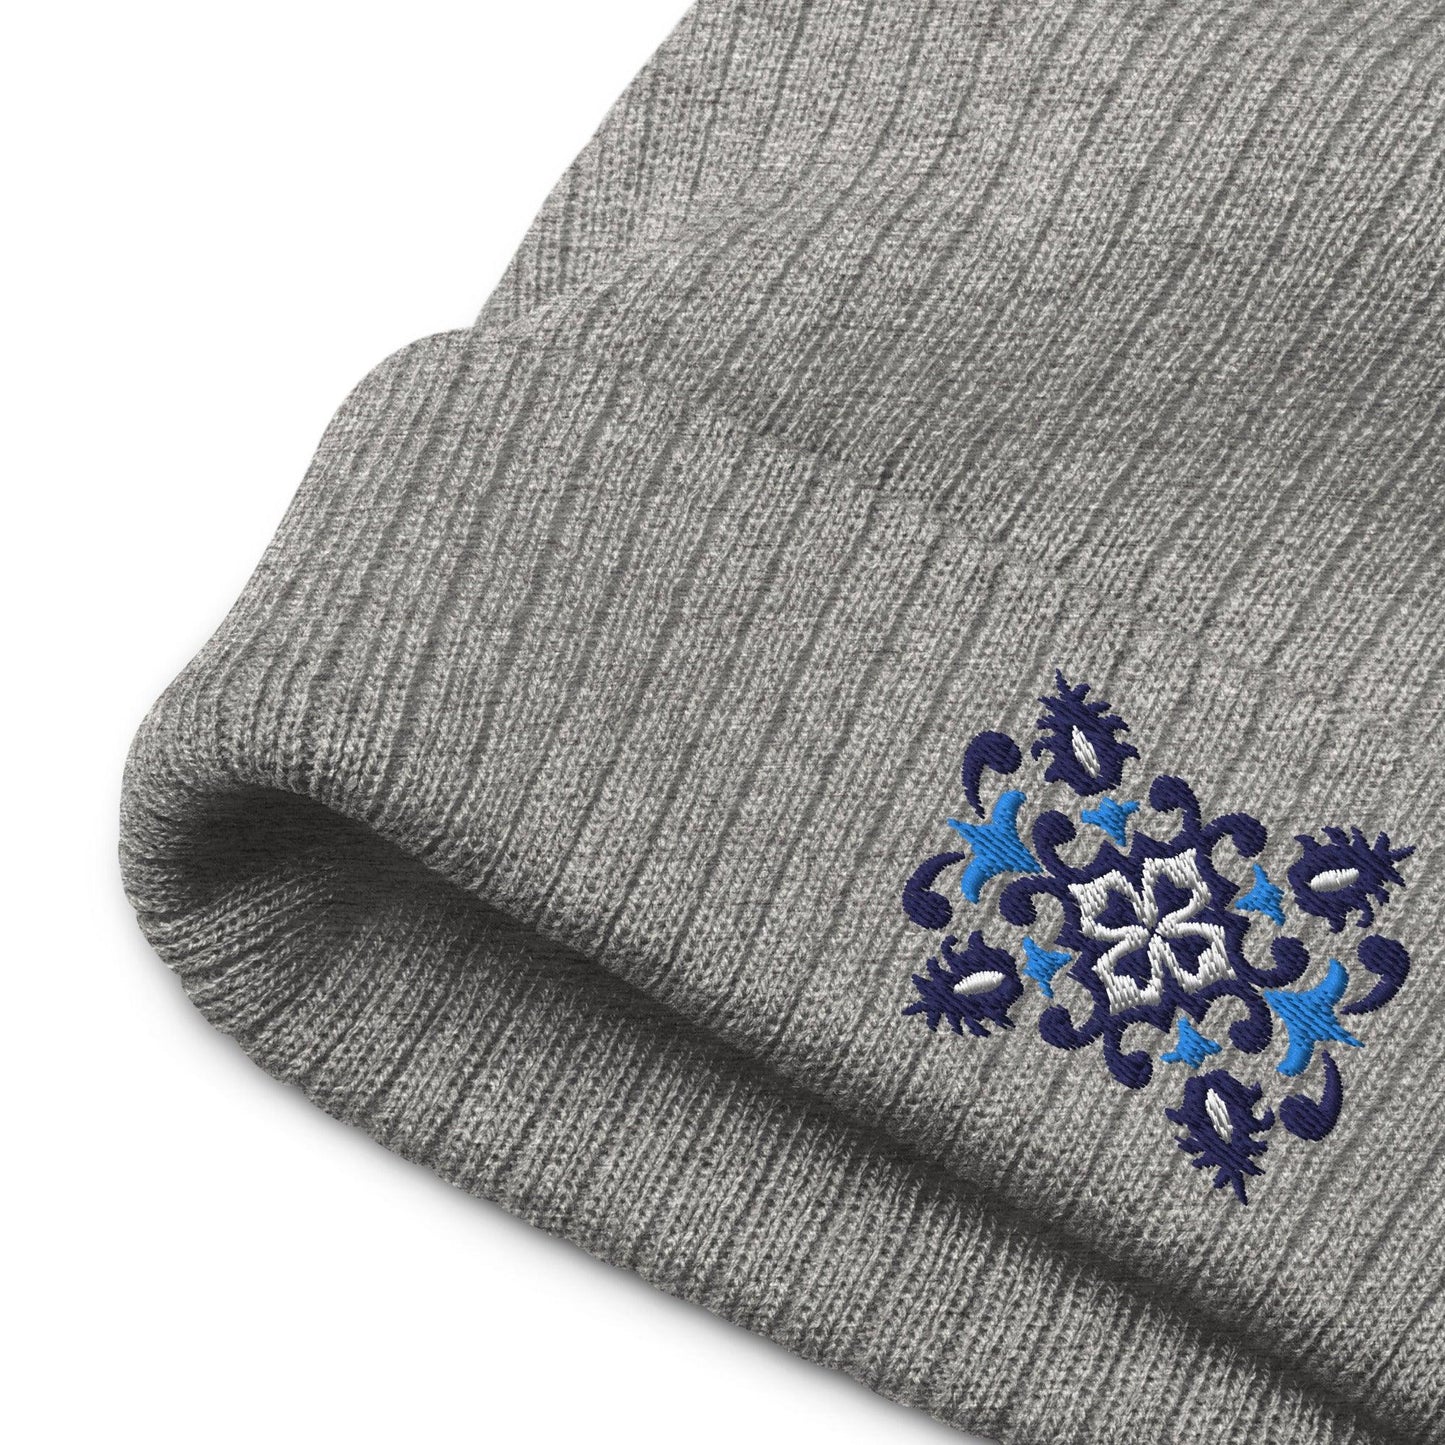 Portuguese Azulejo Tile Motif Embroidered Beanie - The Global Wanderer